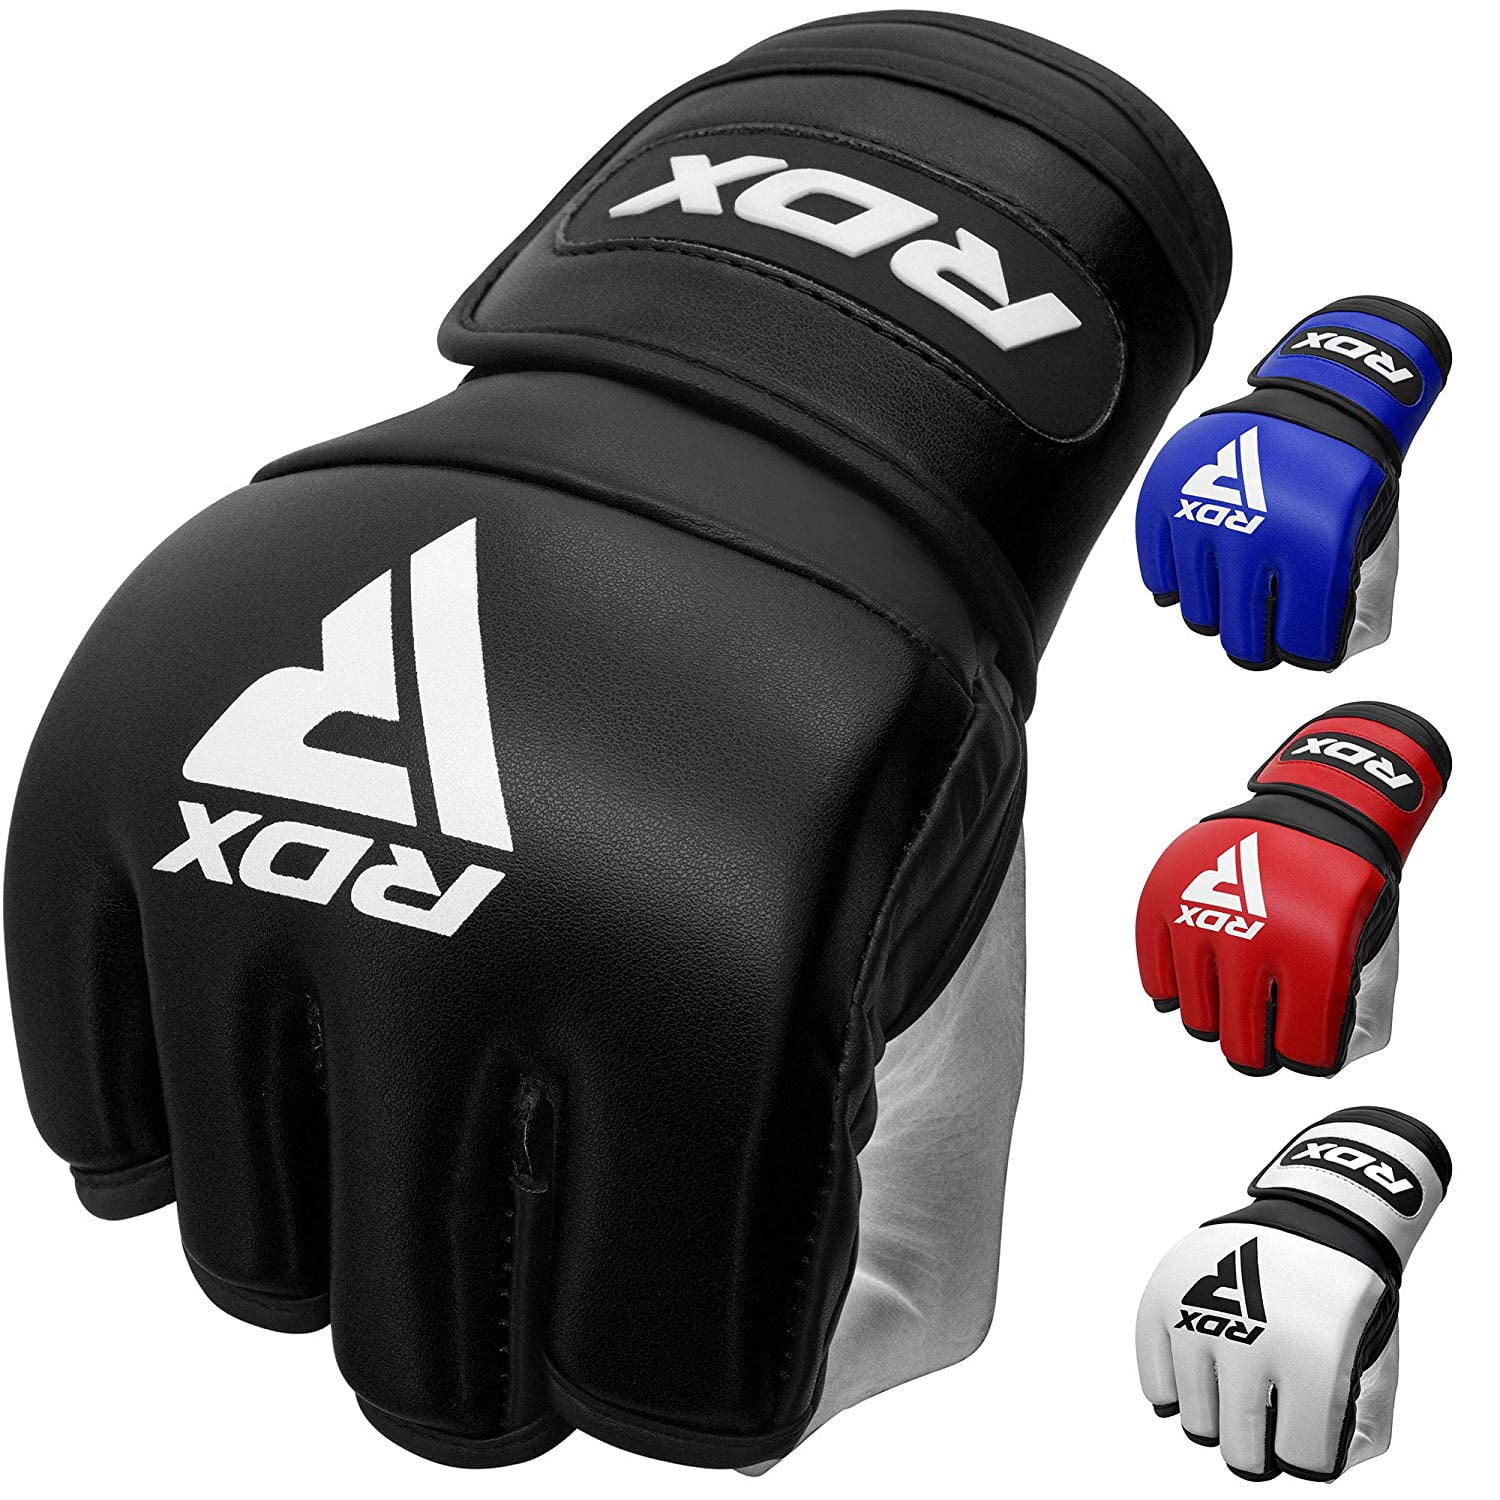 Boxing MMA Bag Gloves Grappling Punching Gym Training Martial Arts Sparring UFC 